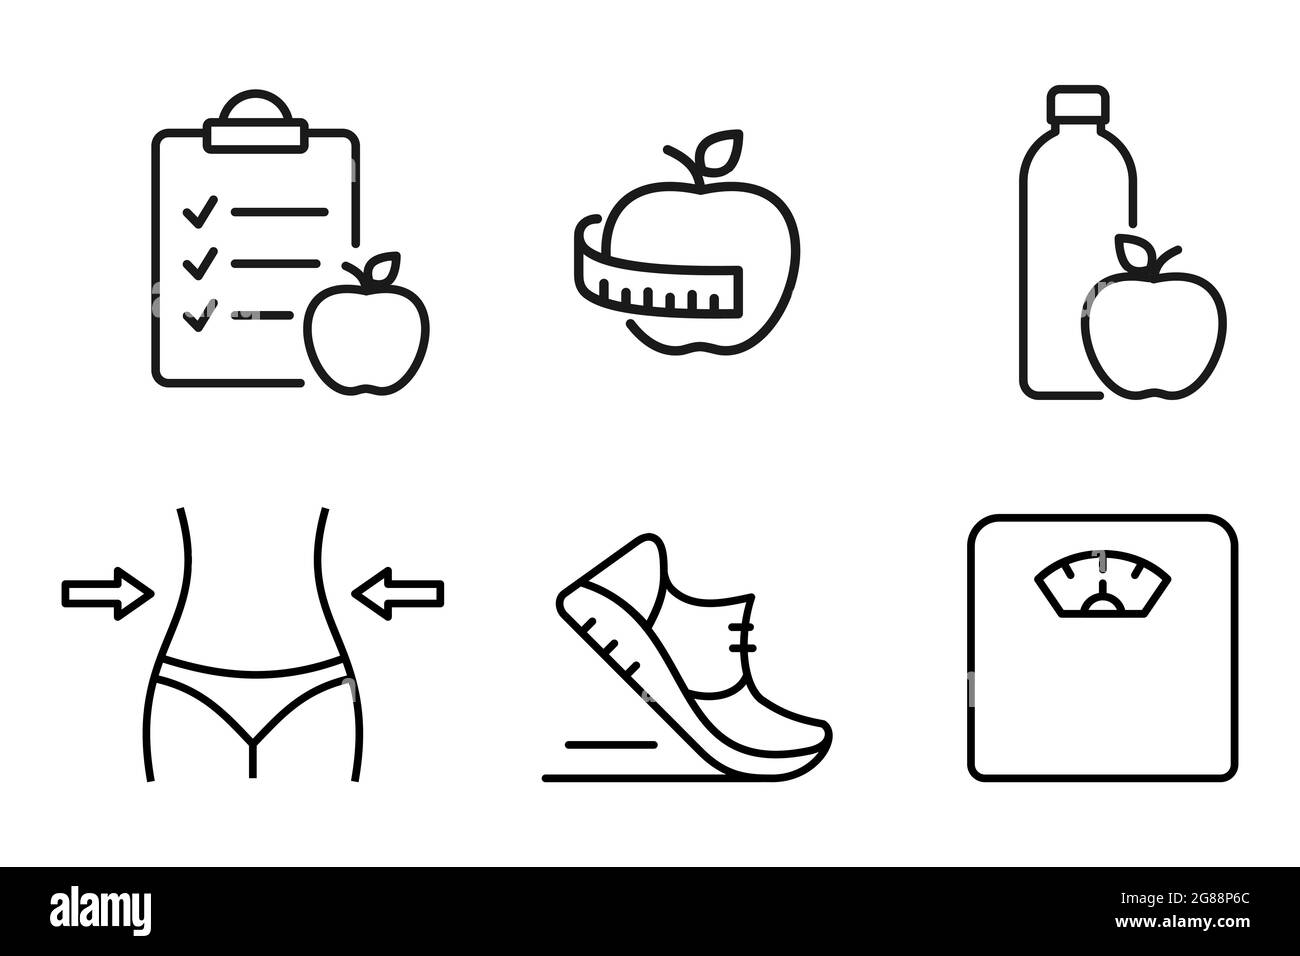 Fitness and healthy lifestyle line icon set. Diet and sport symbols. Losing weight concept. Apple, water bottle, checklist, running shoe. Vector Stock Vector